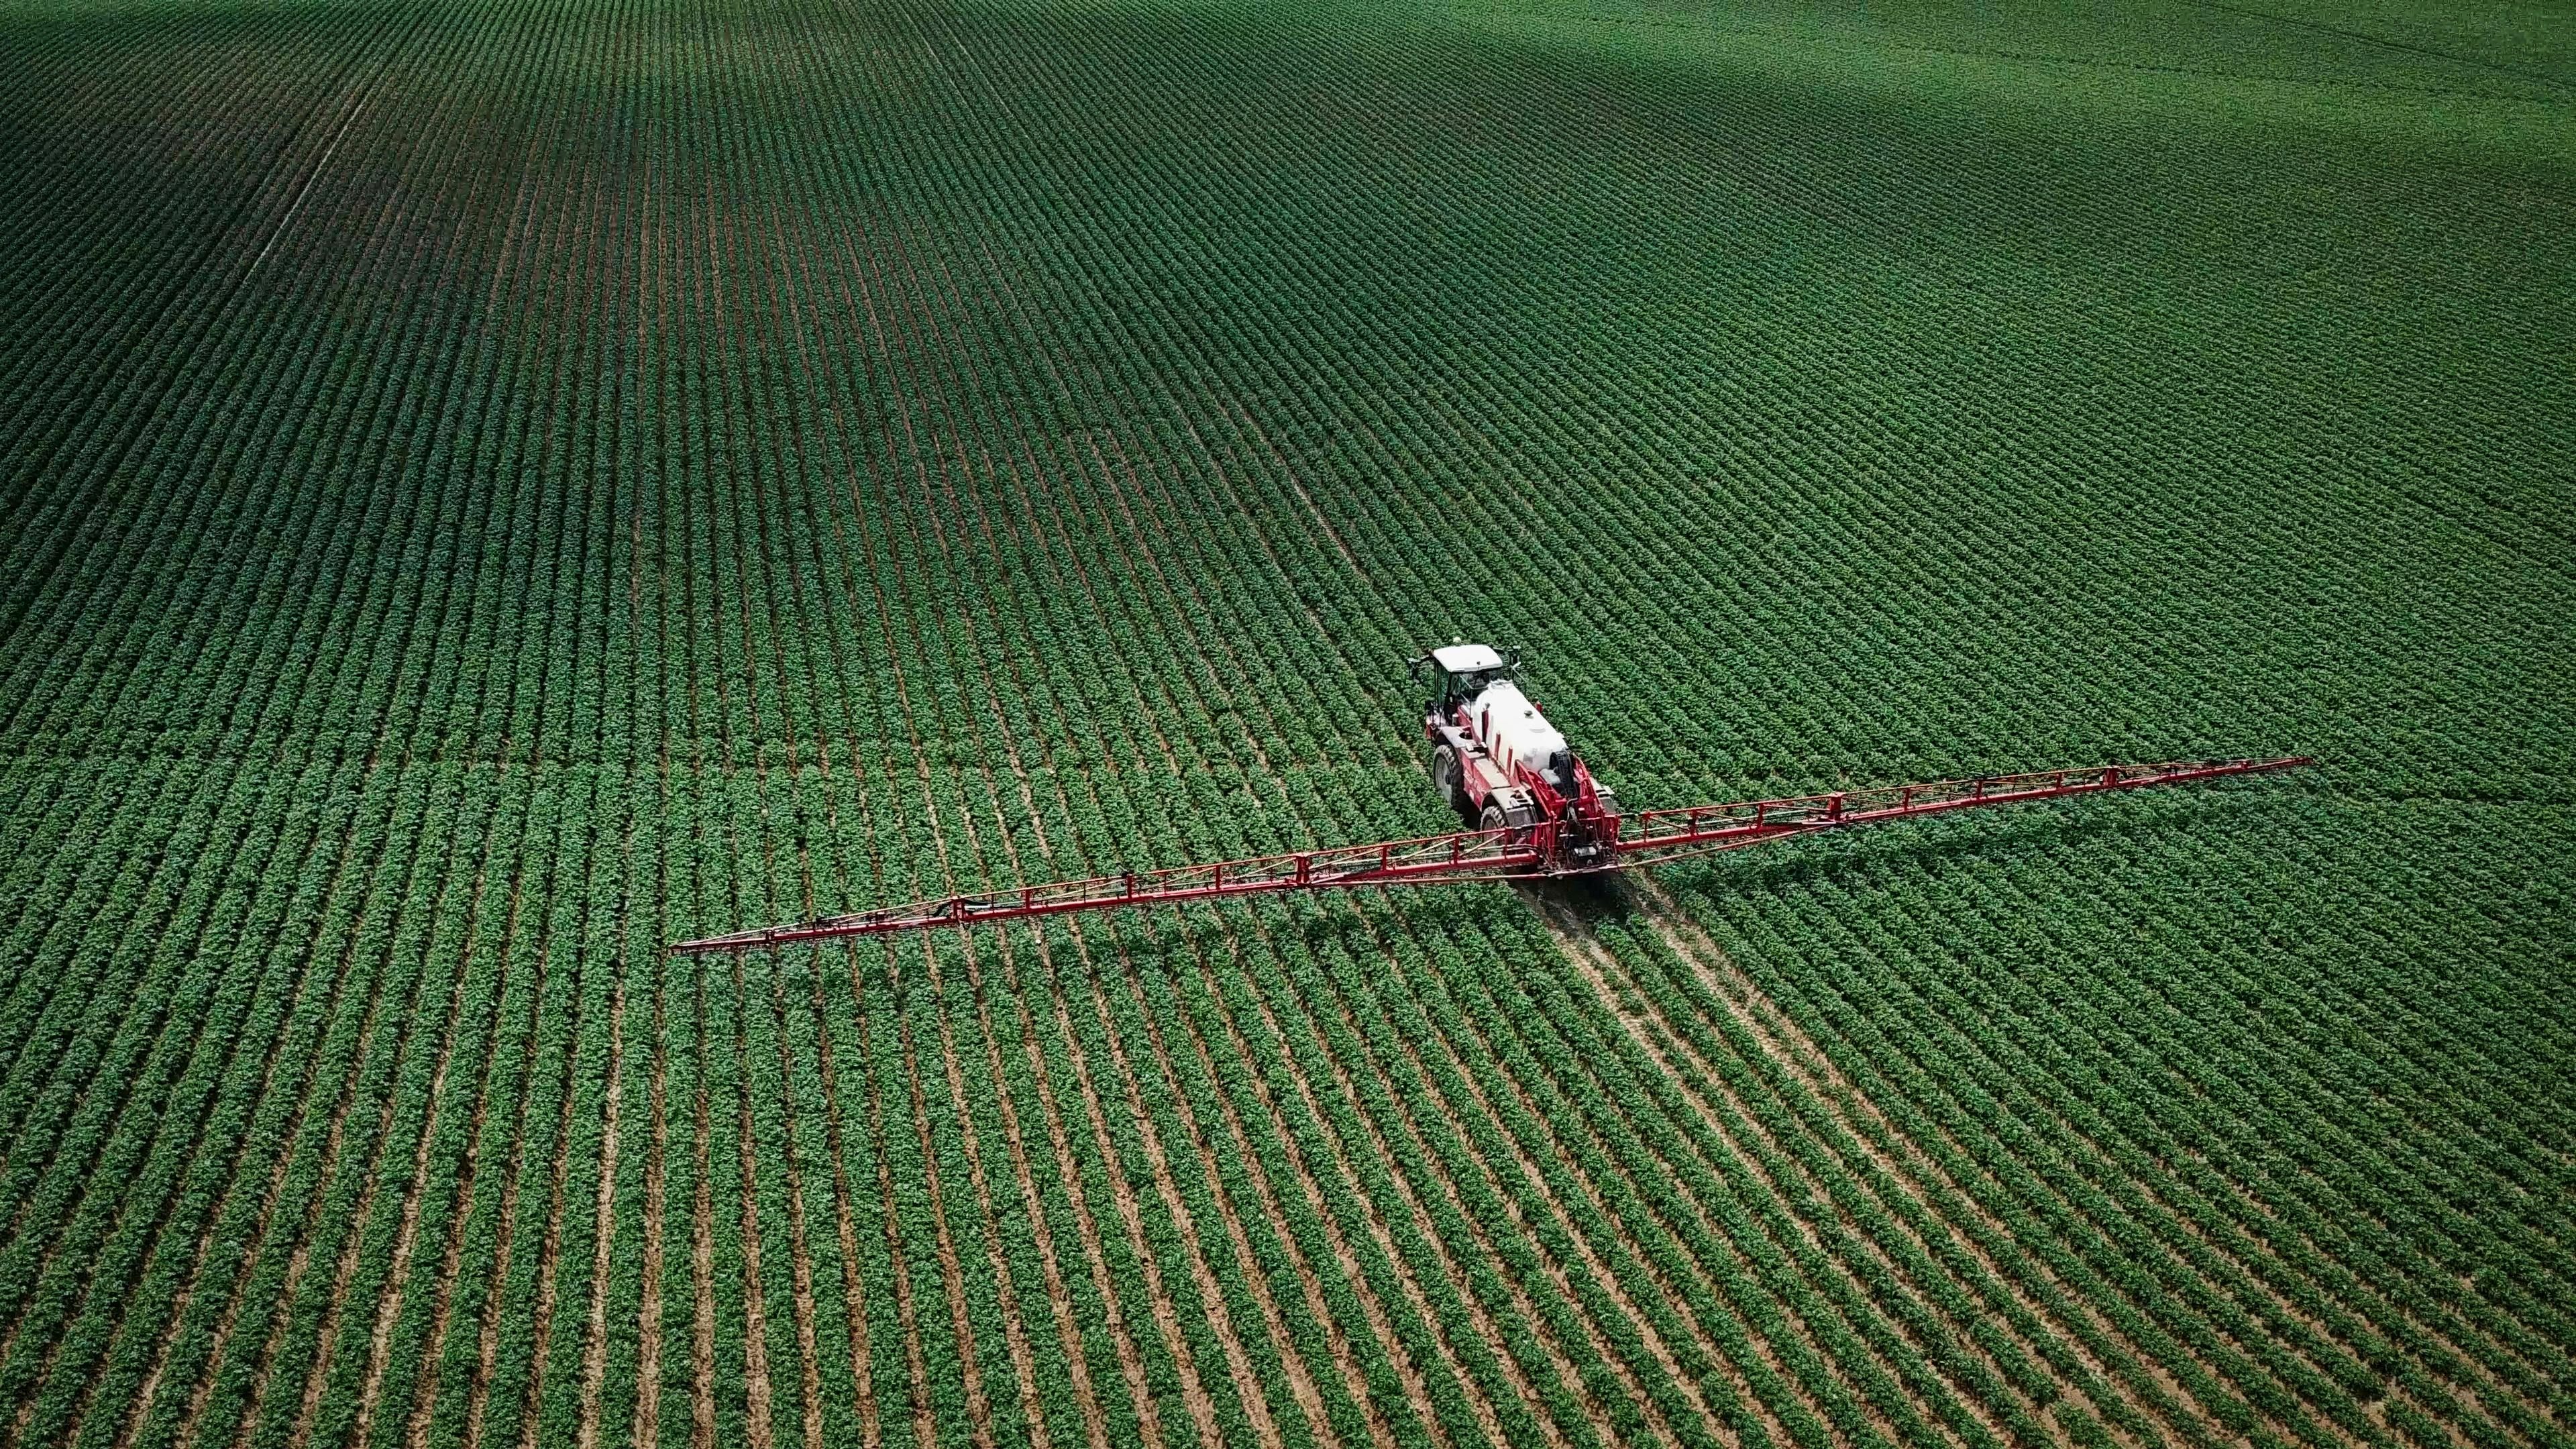 Spraying pesticides on agricultural land